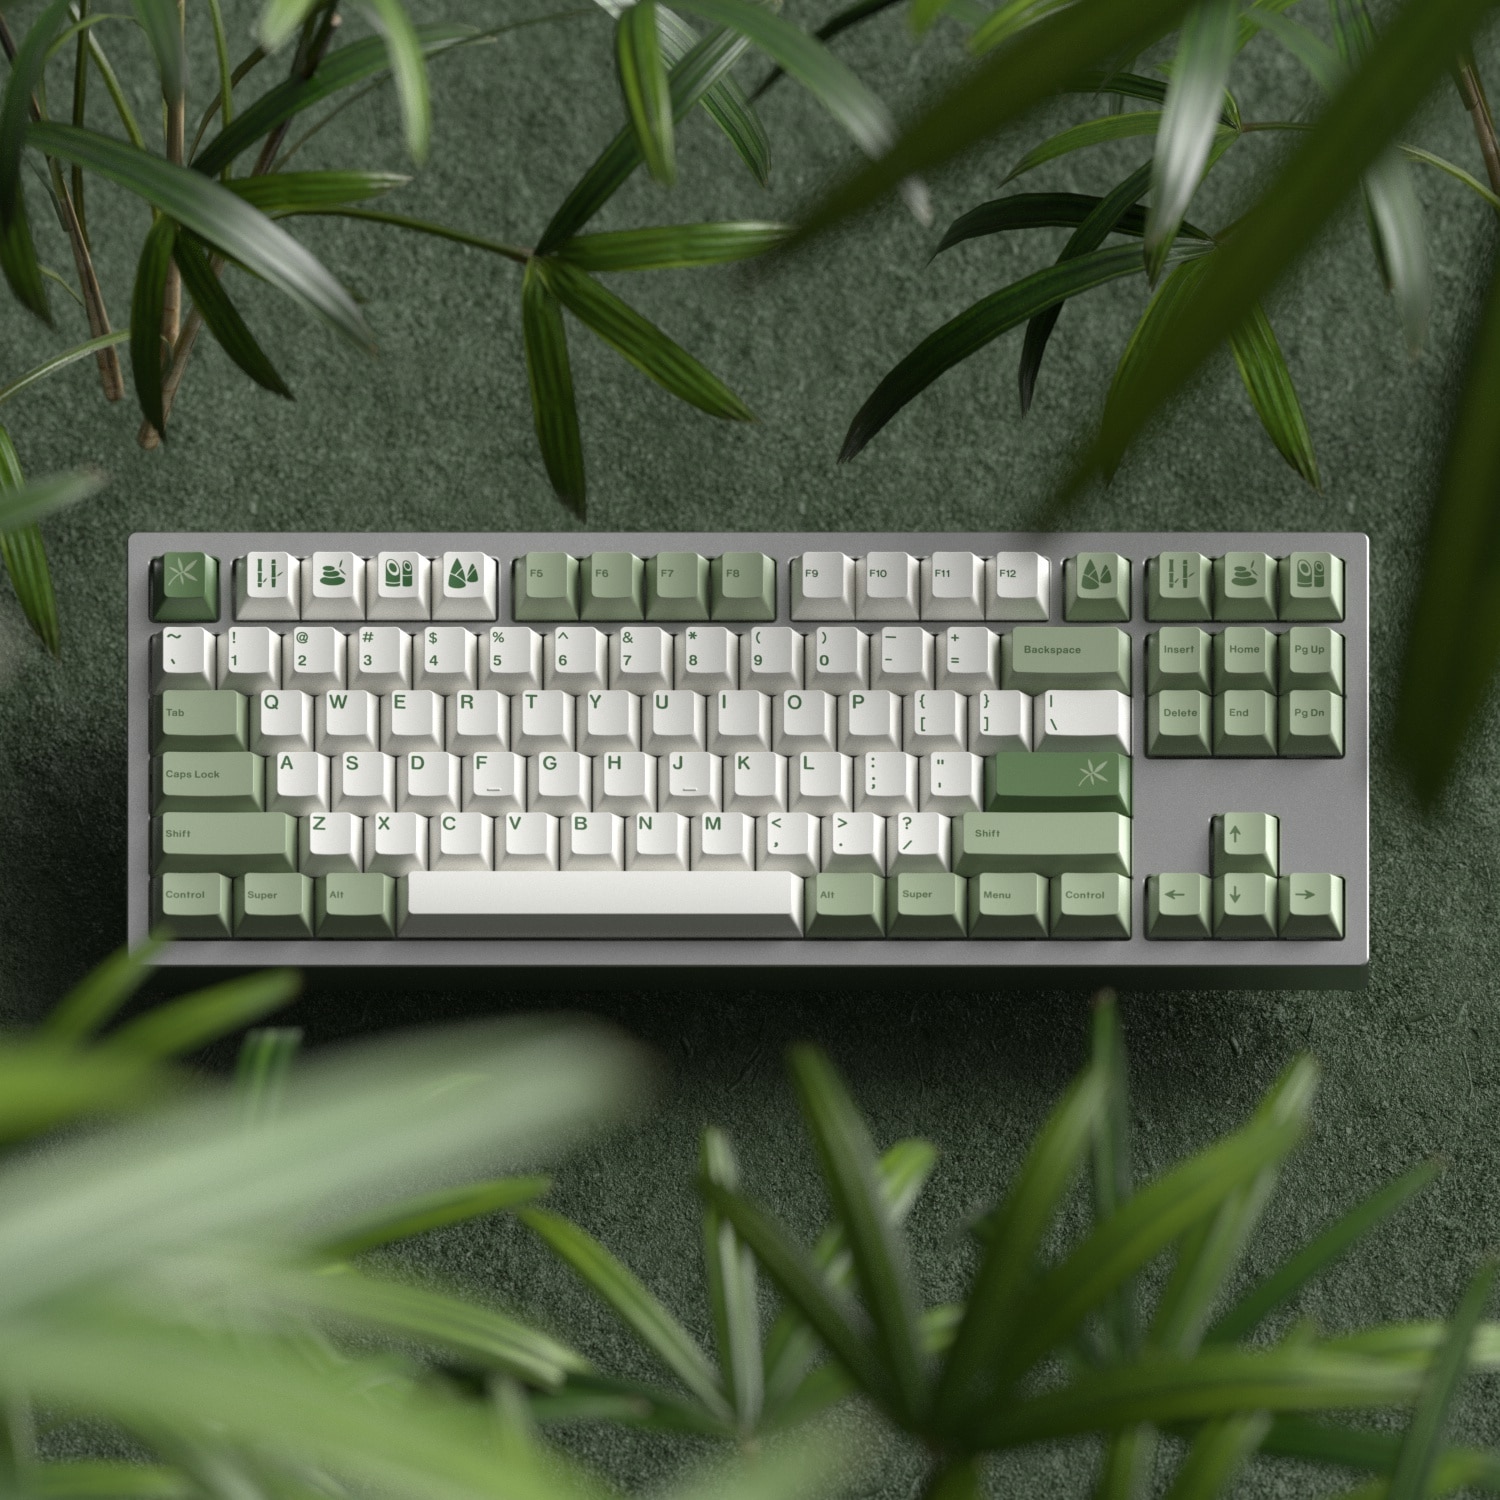 1 Set Bamboo Forest Keycaps PBT Dye Subbed Key Caps Cherry Profile Warm White Keycap For 3 - GMK Keycap